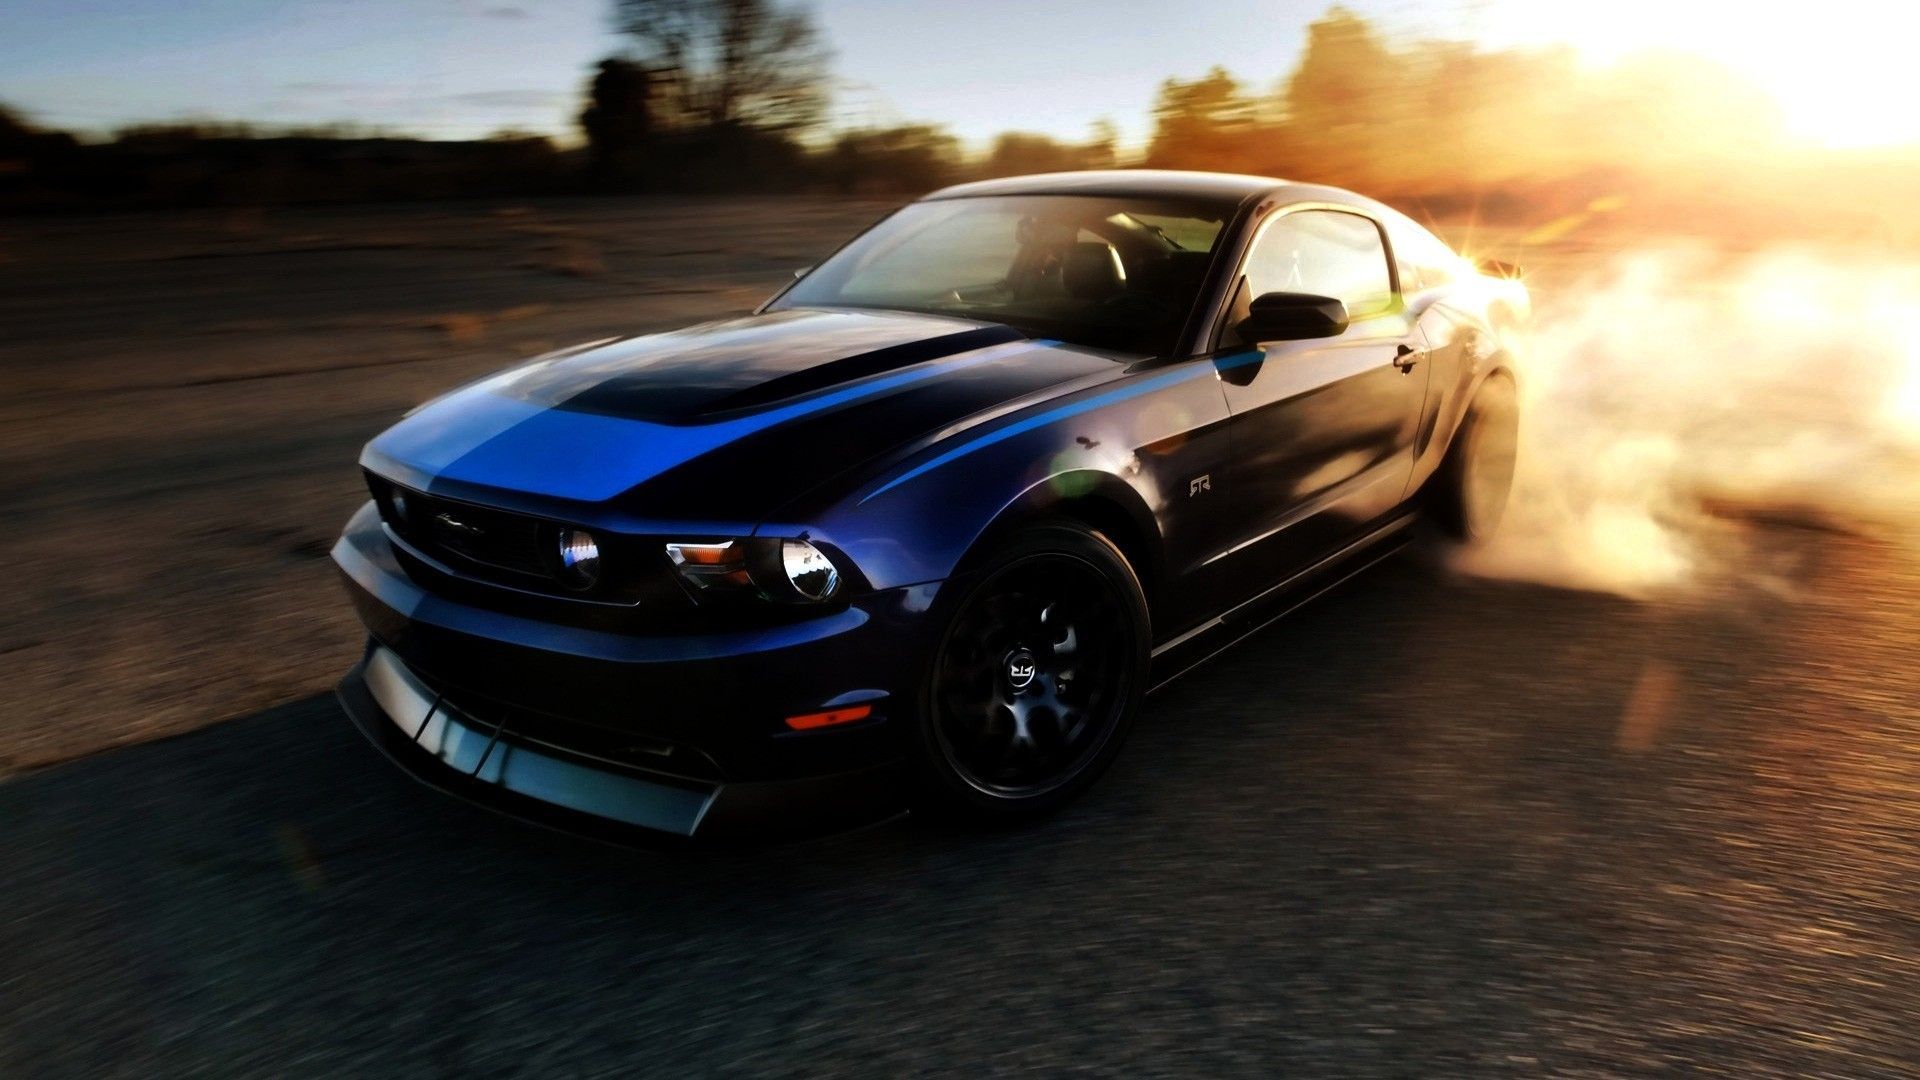 Ford Mustang Windows 8.1 Theme and Desktop | All for Windows 10 Free